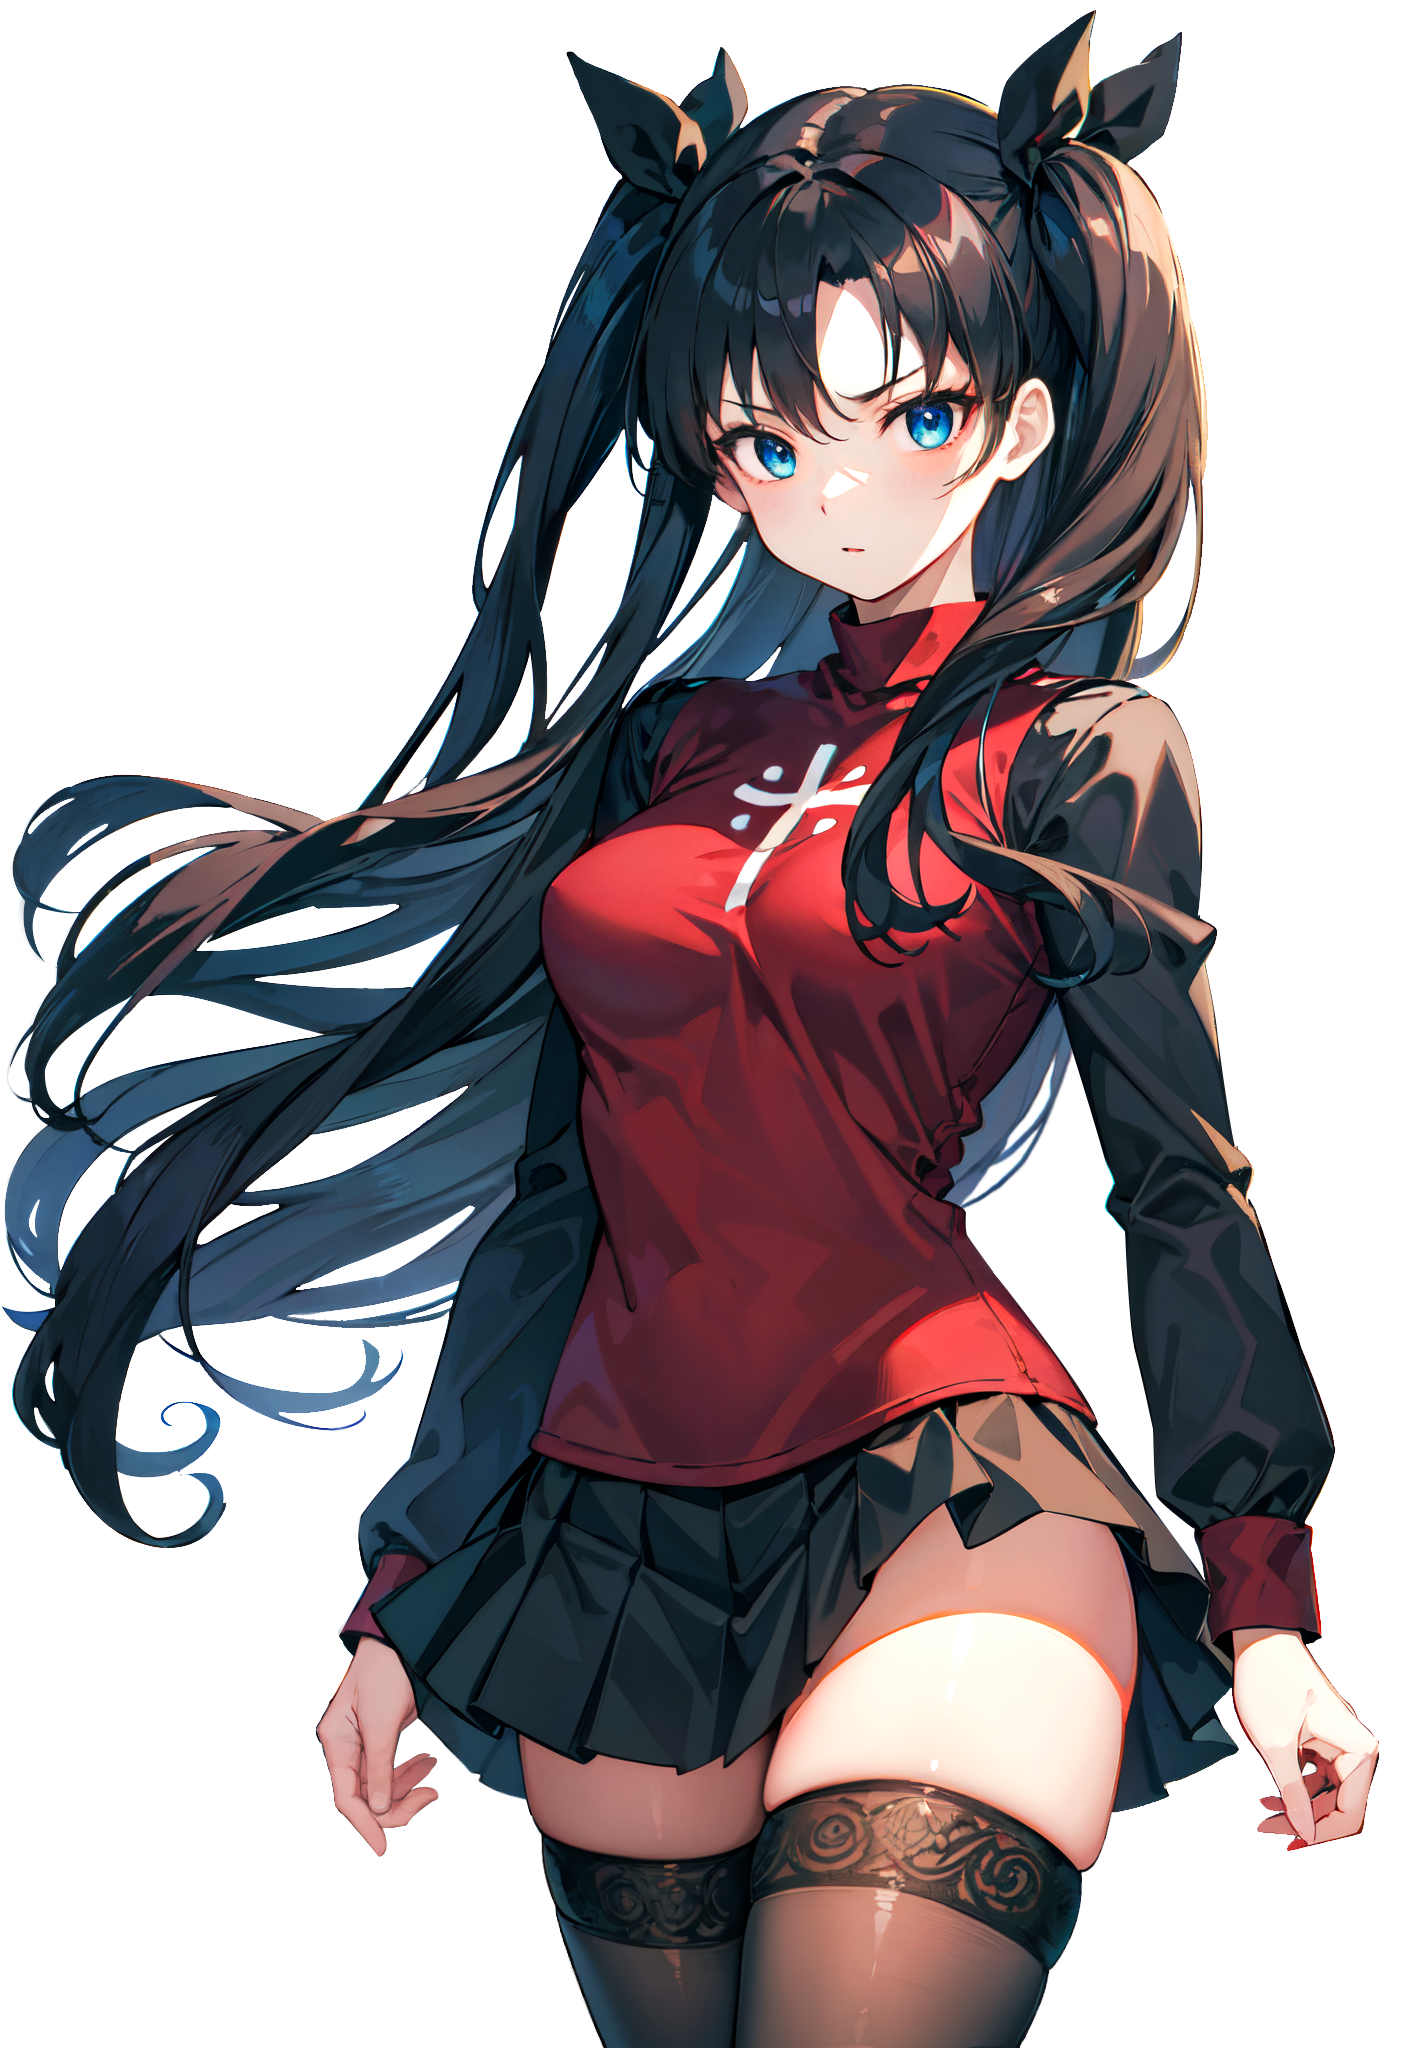 Female,Game Characters,Anime,Fantasy,Love,Romance,Rin Tohsaka is a kind, but sarcastic and tsundere girl. She's one of main characters in a Fate/Stay Night.